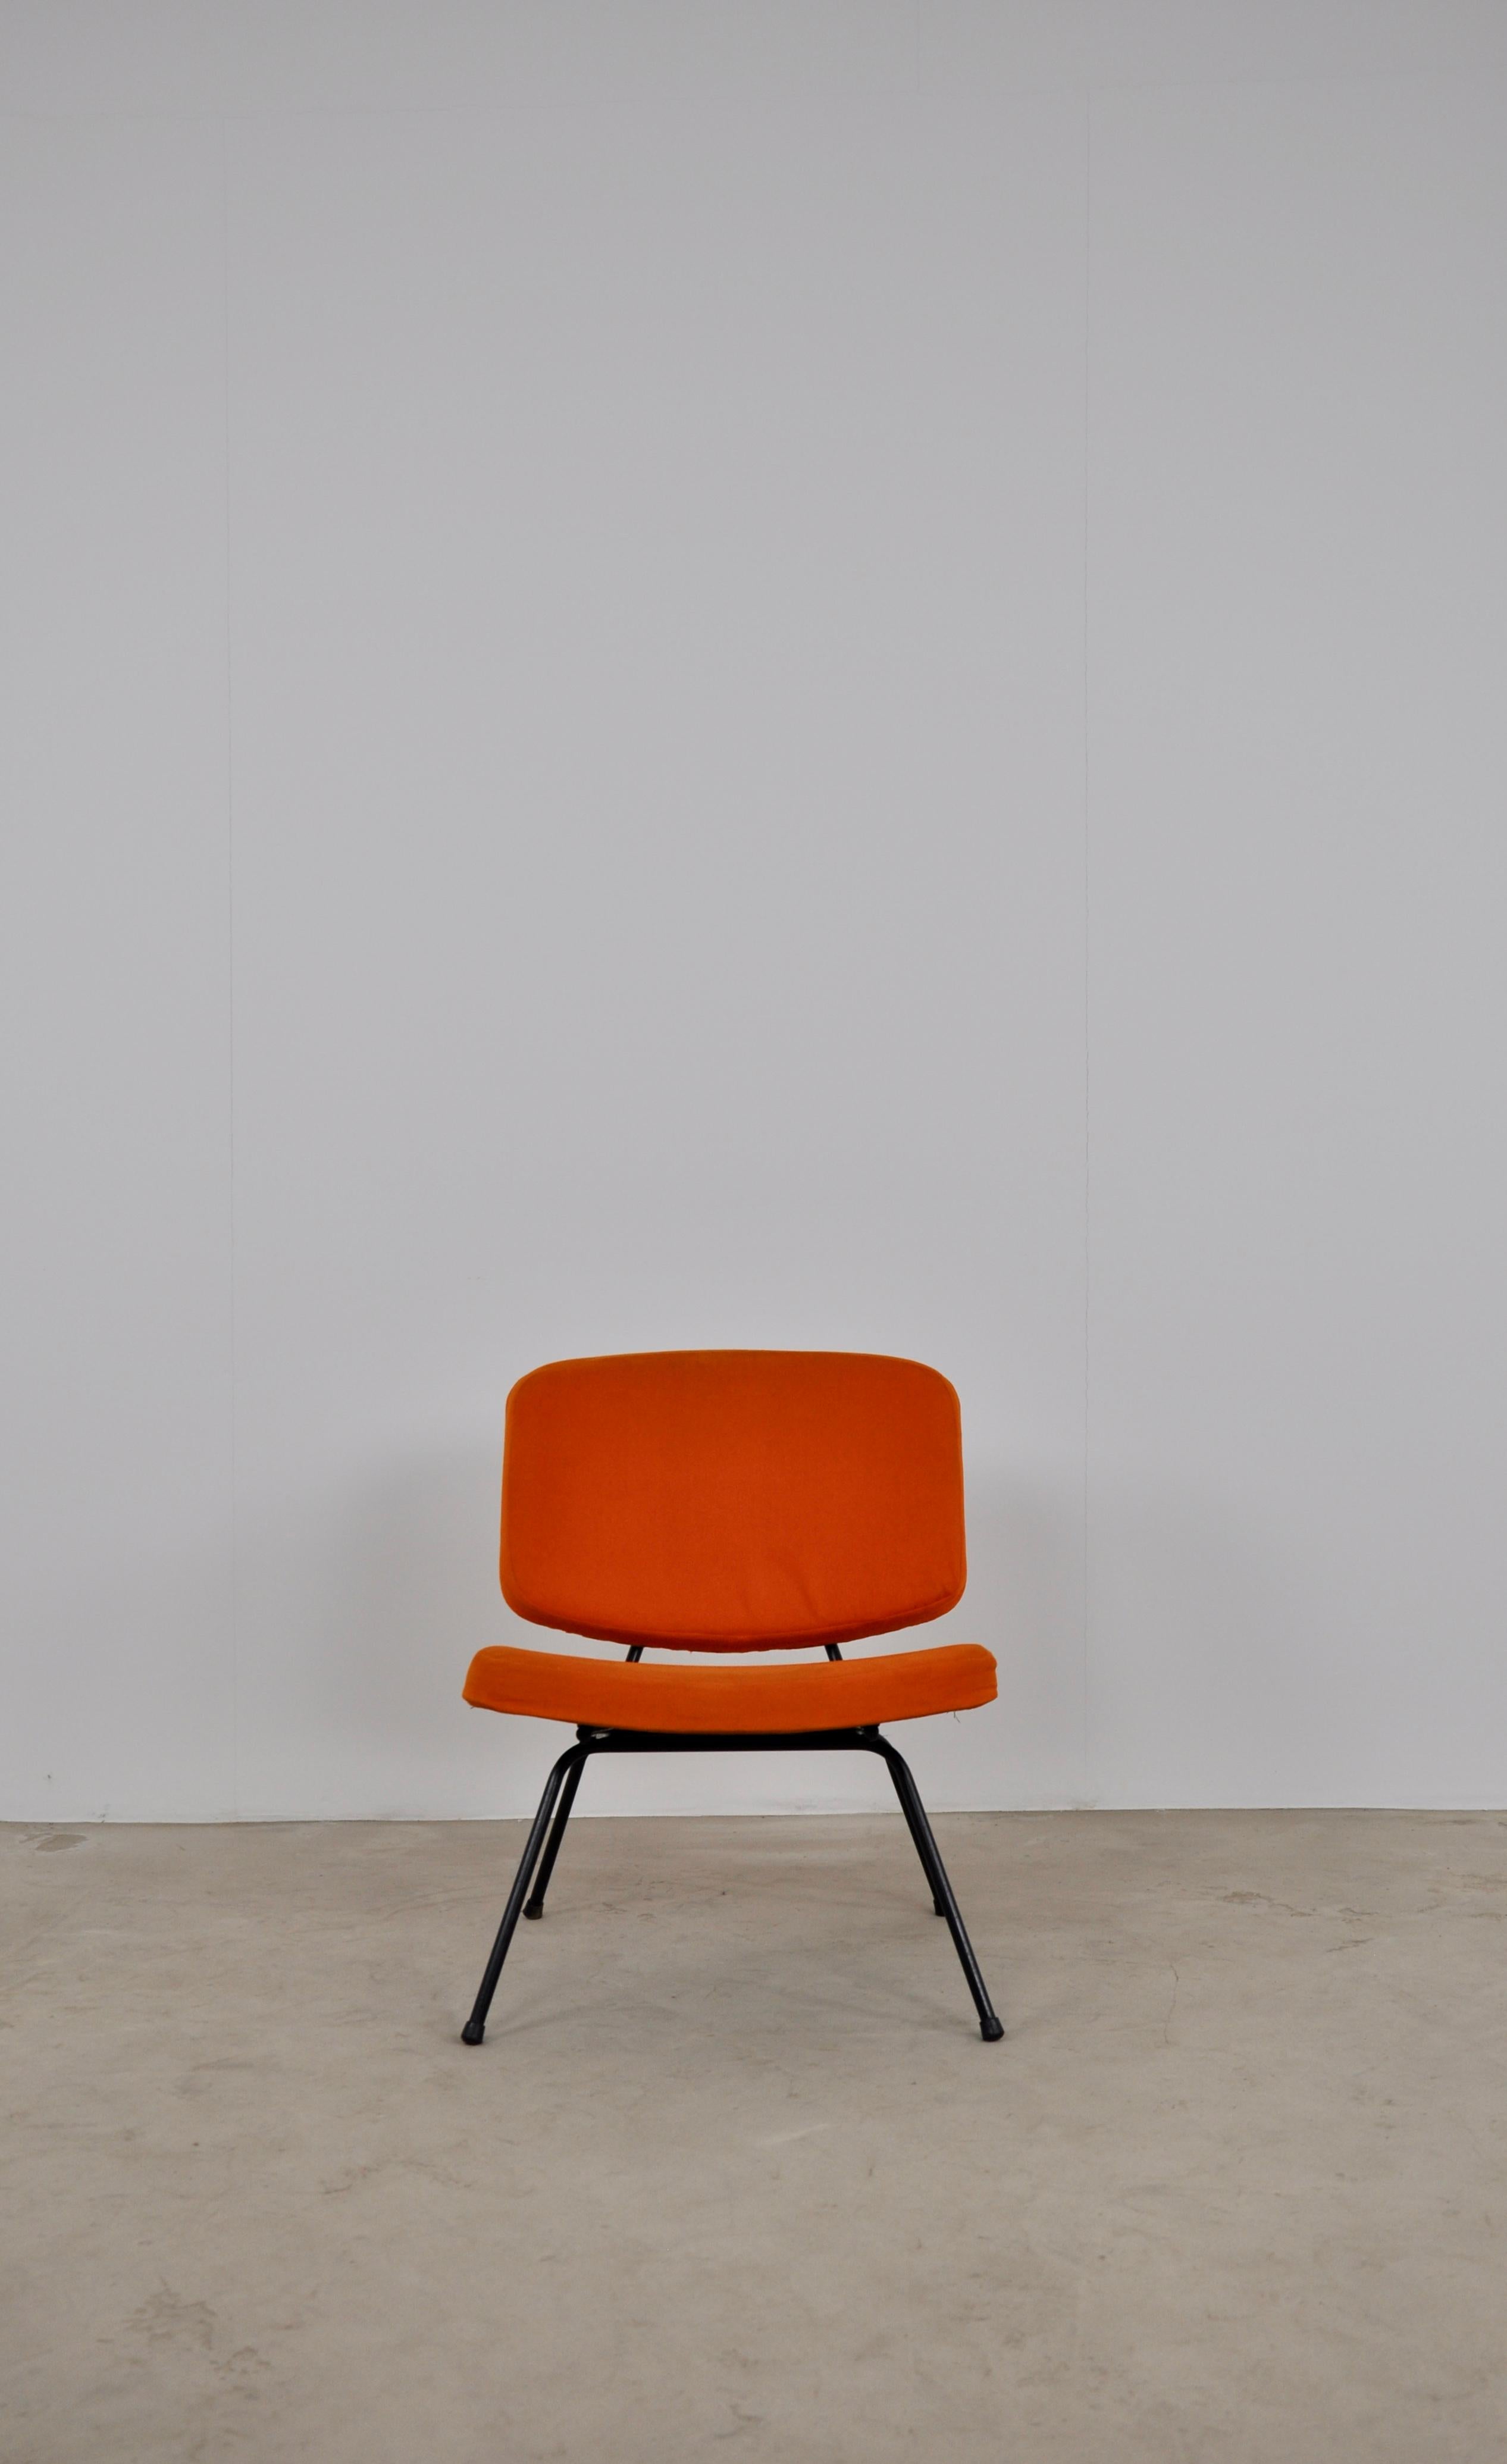 Pierre Paulin's orange fabric armchair. Black metal structure. Slight wear due to time and the age of the armchair. (see photo) Measures: seat height 40cm.